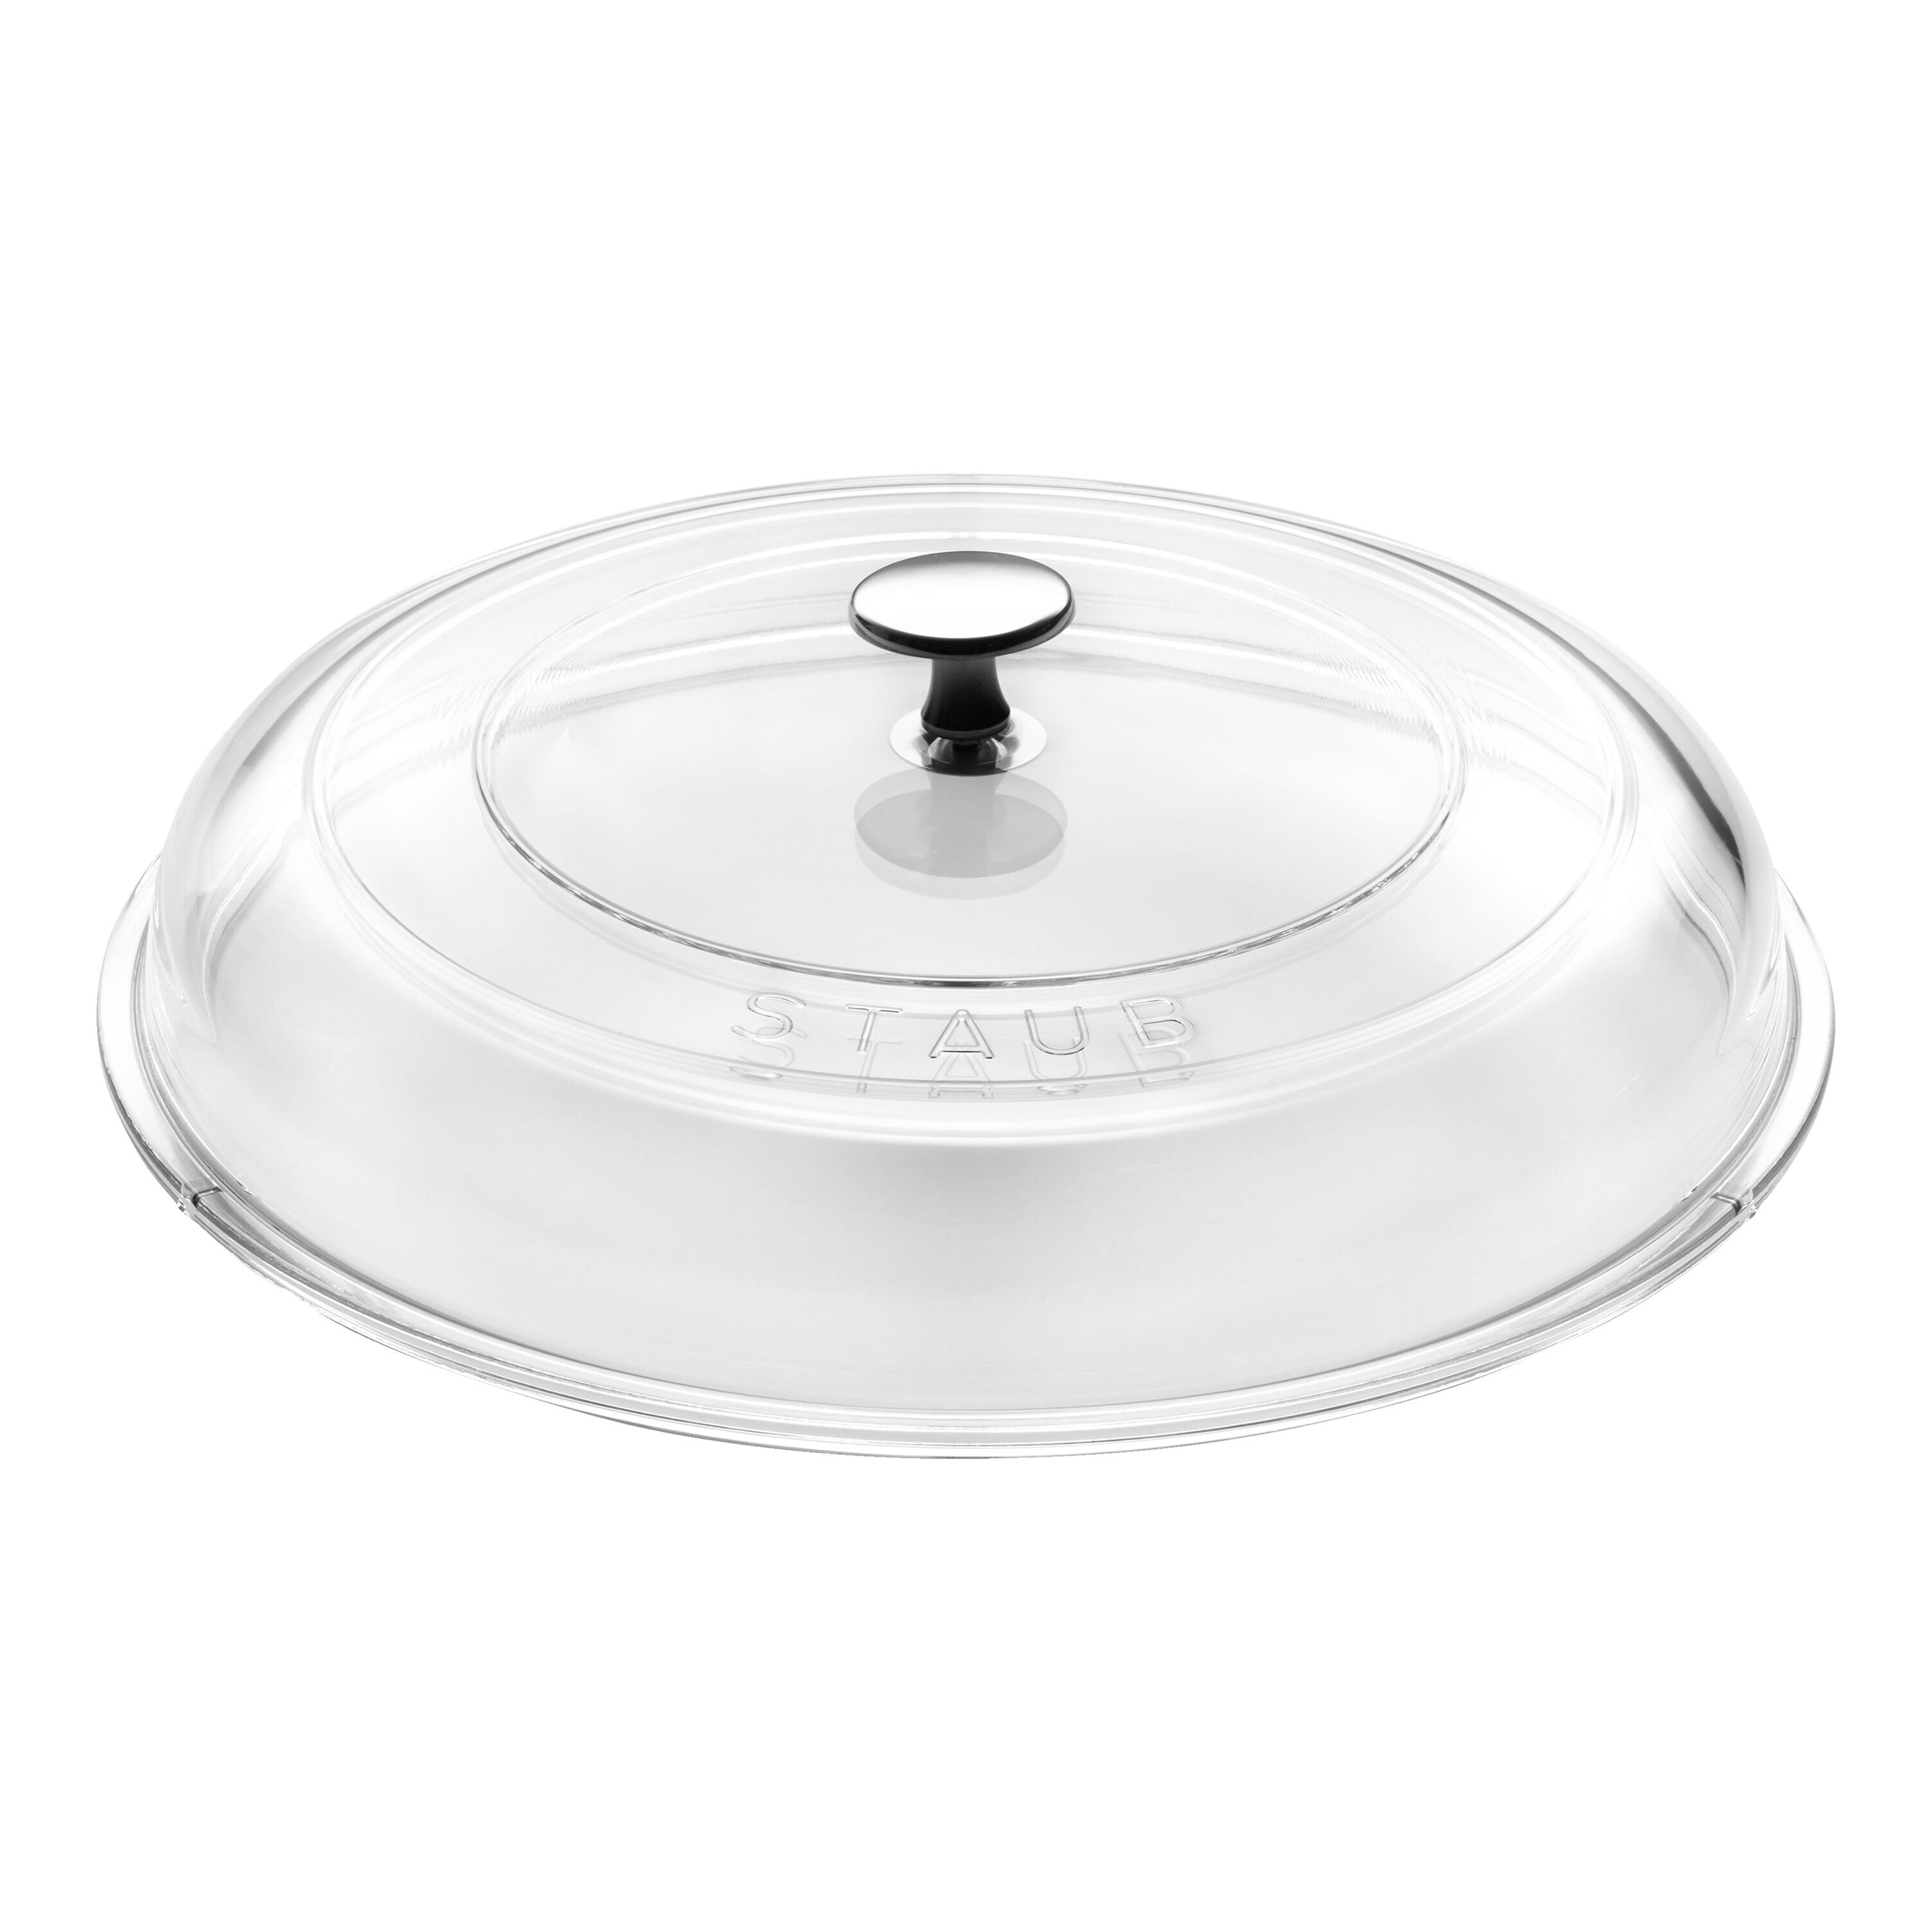 Lodge 8 Tempered Glass Lid